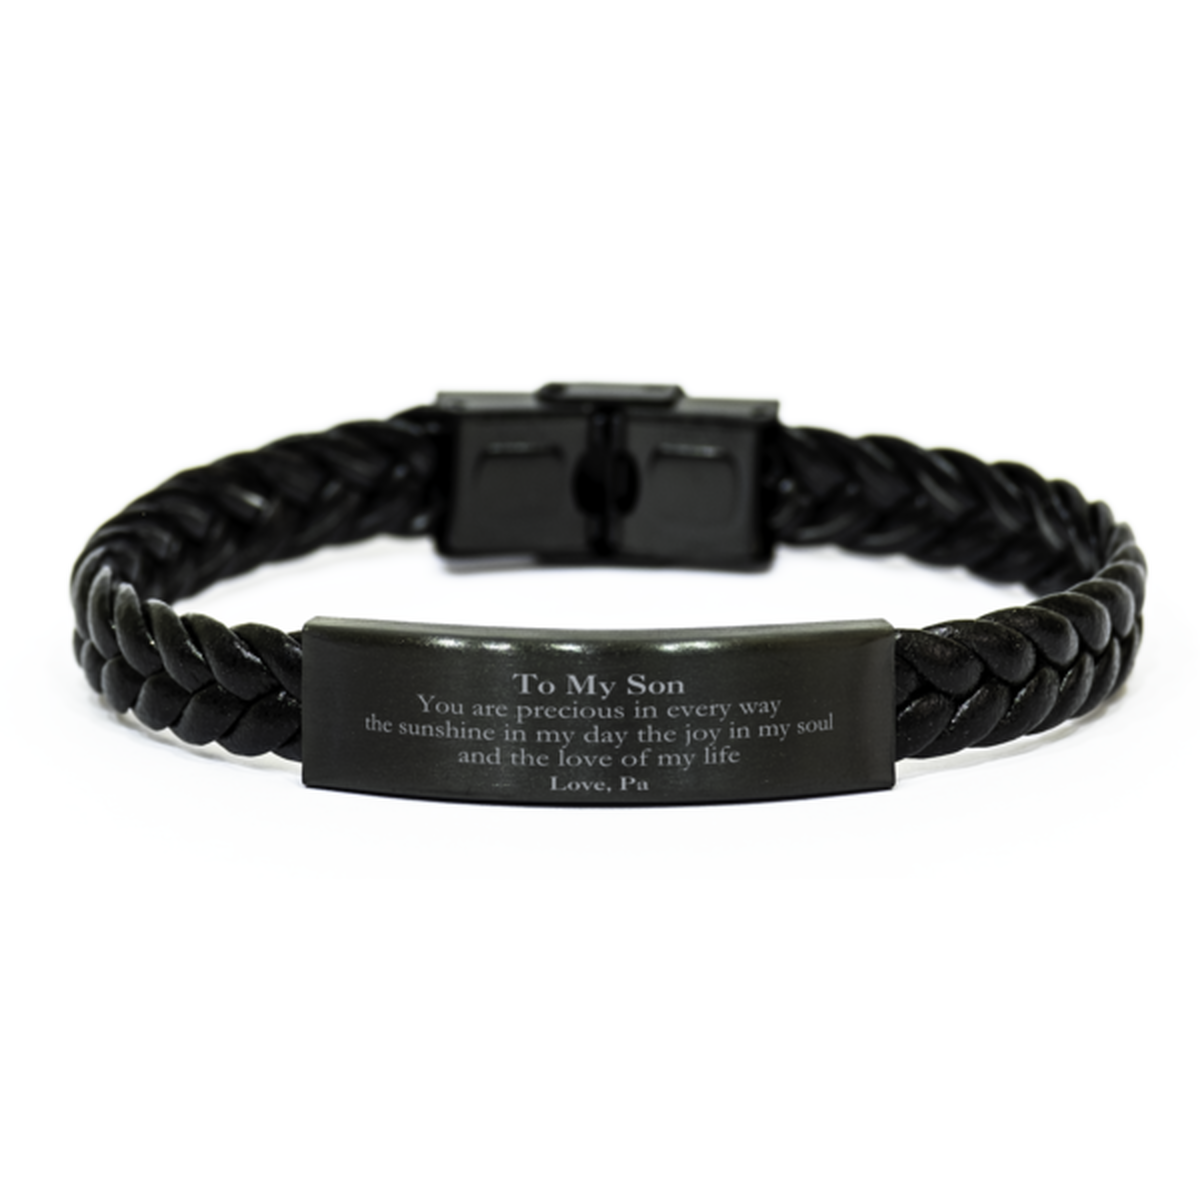 Graduation Gifts for Son Braided Leather Bracelet Present from Pa, Christmas Son Birthday Gifts Son You are precious in every way the sunshine in my day. Love, Pa